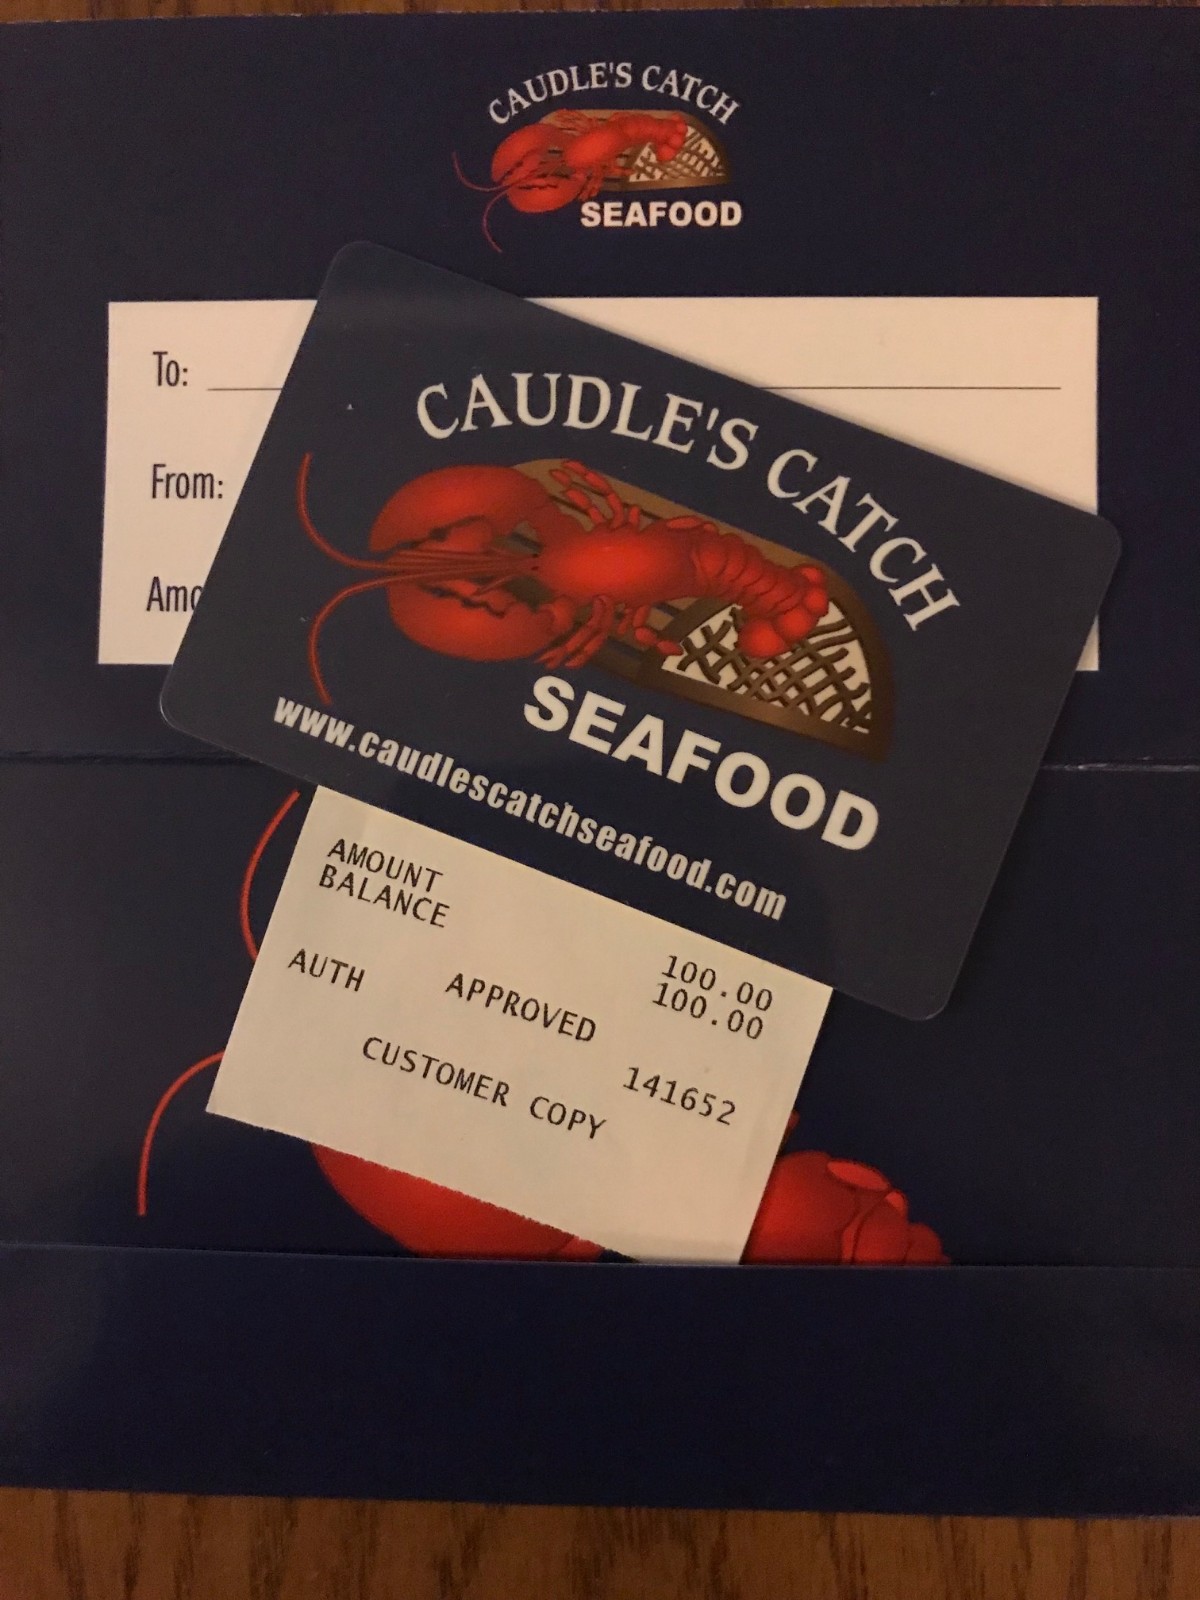 Caudle's Catch Gift Certificate